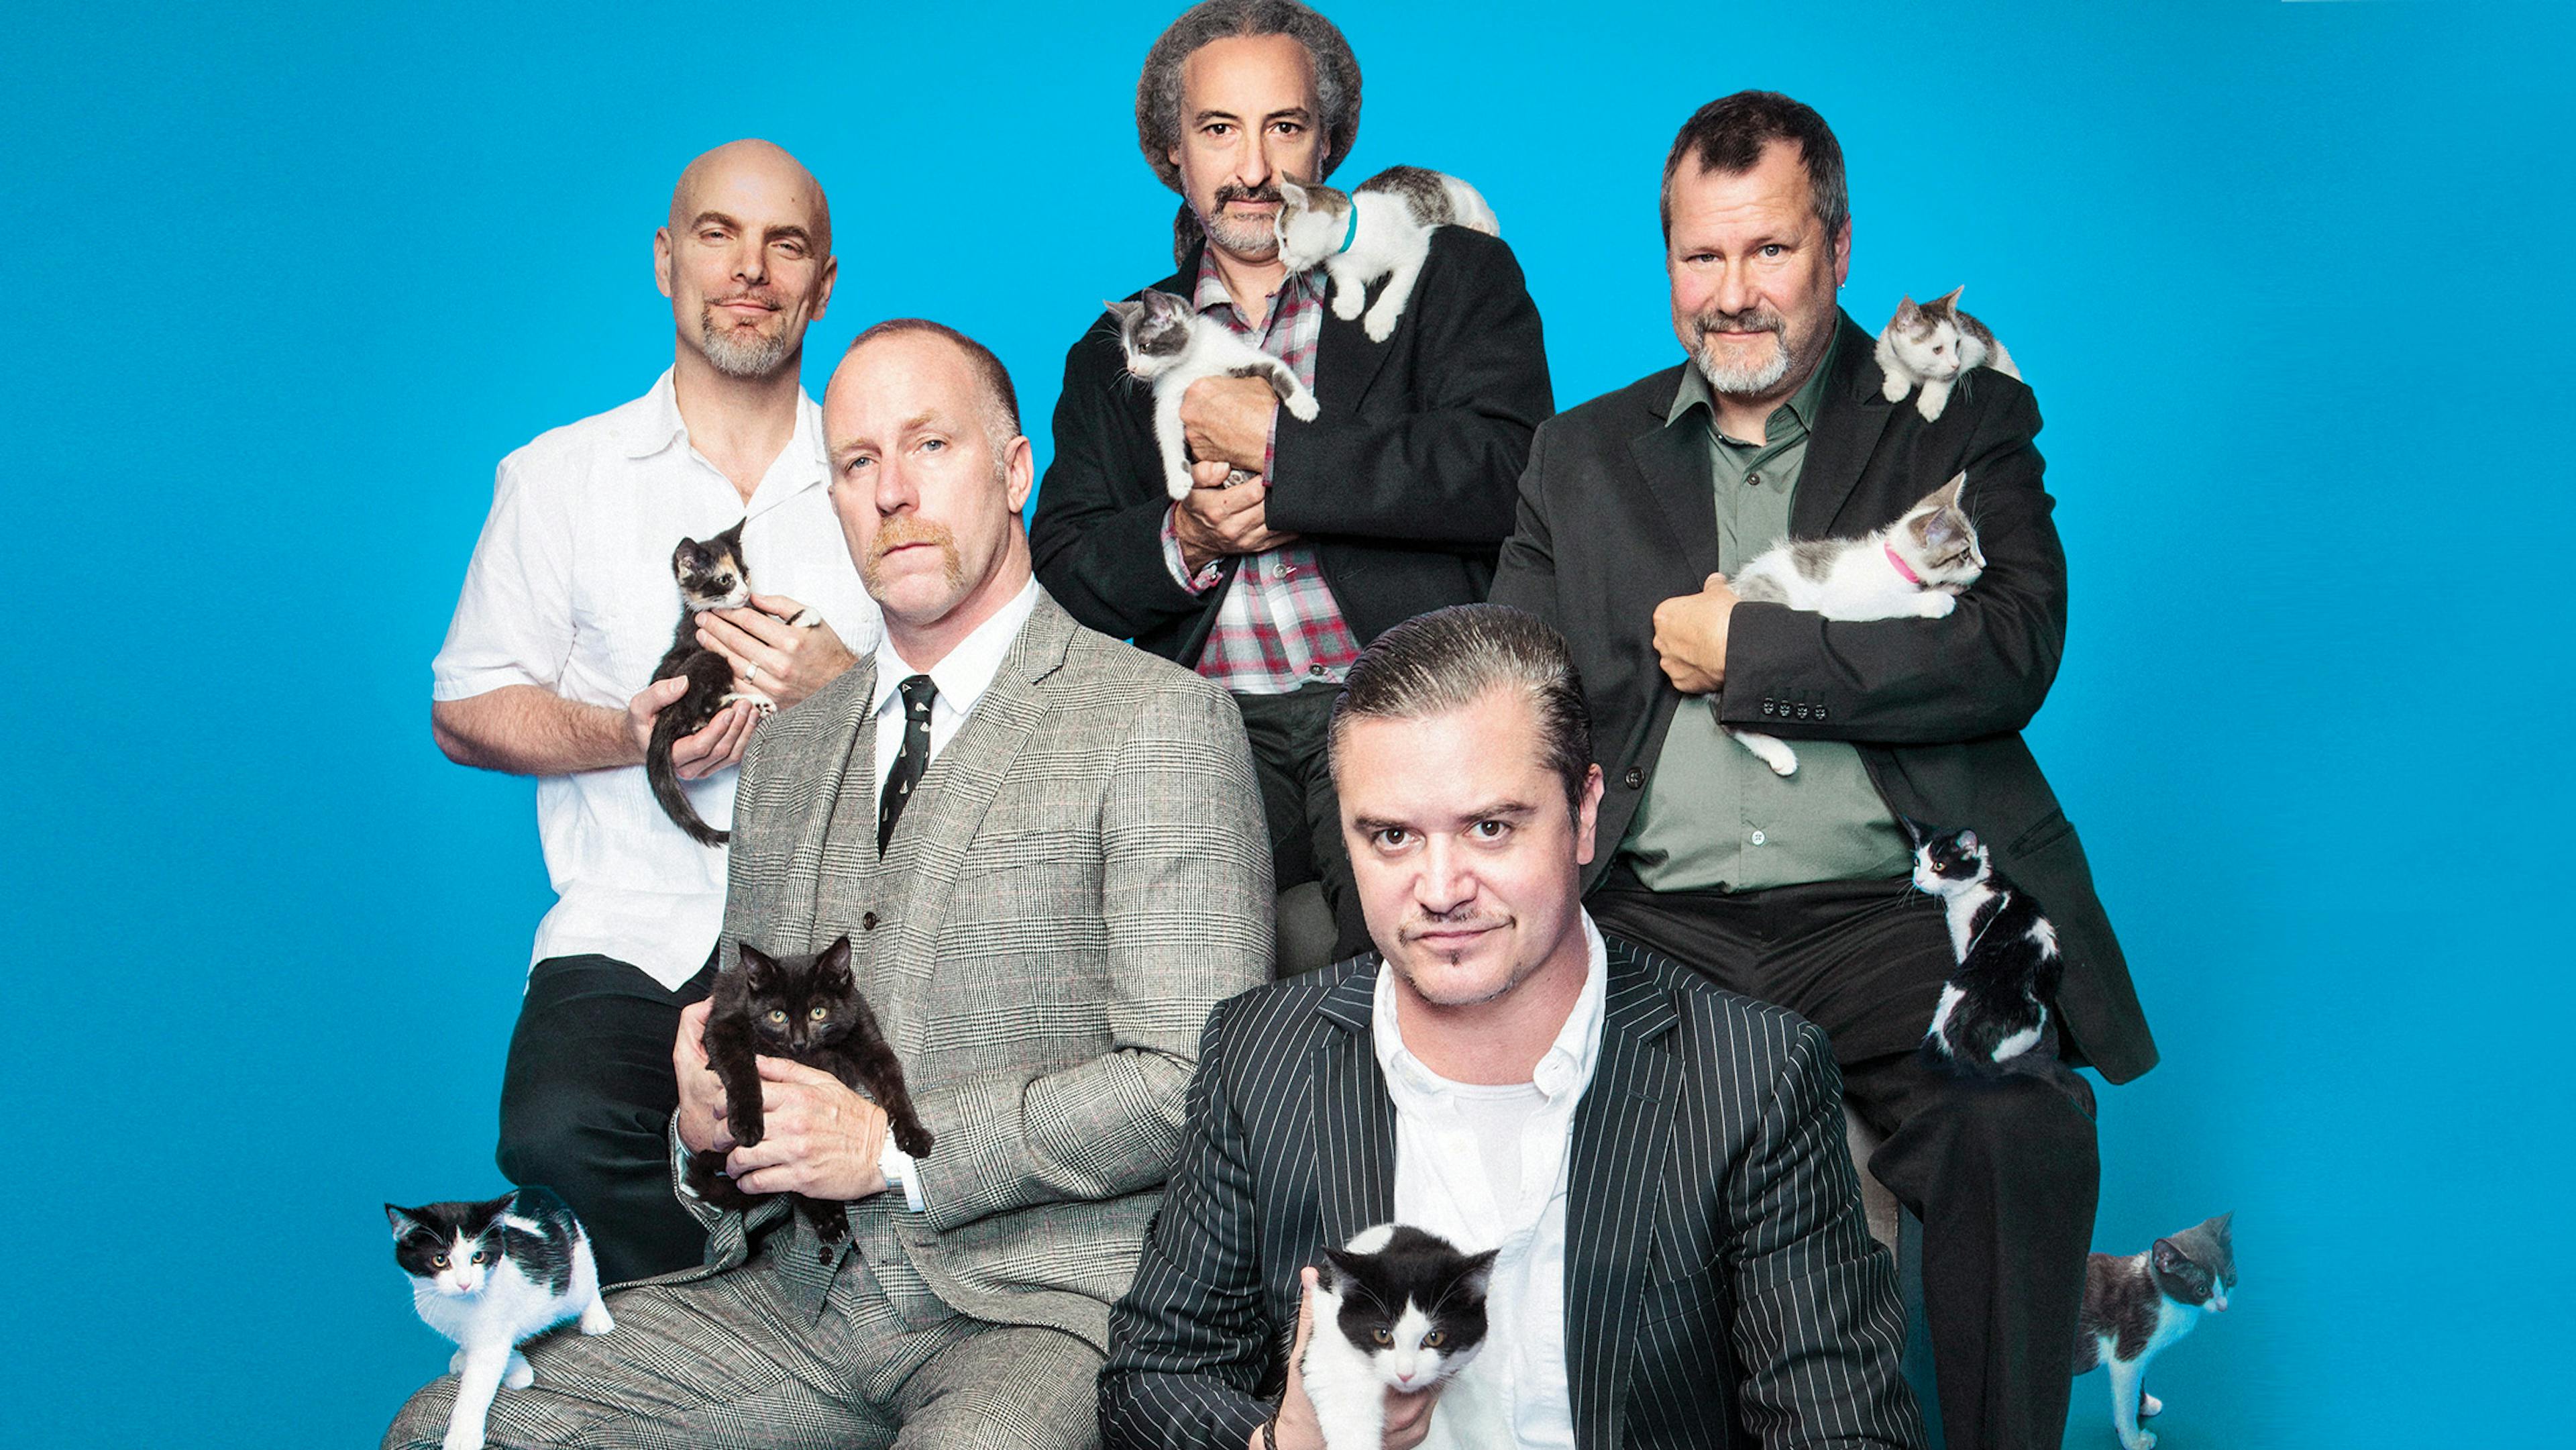 The 20 greatest Faith No More songs – ranked